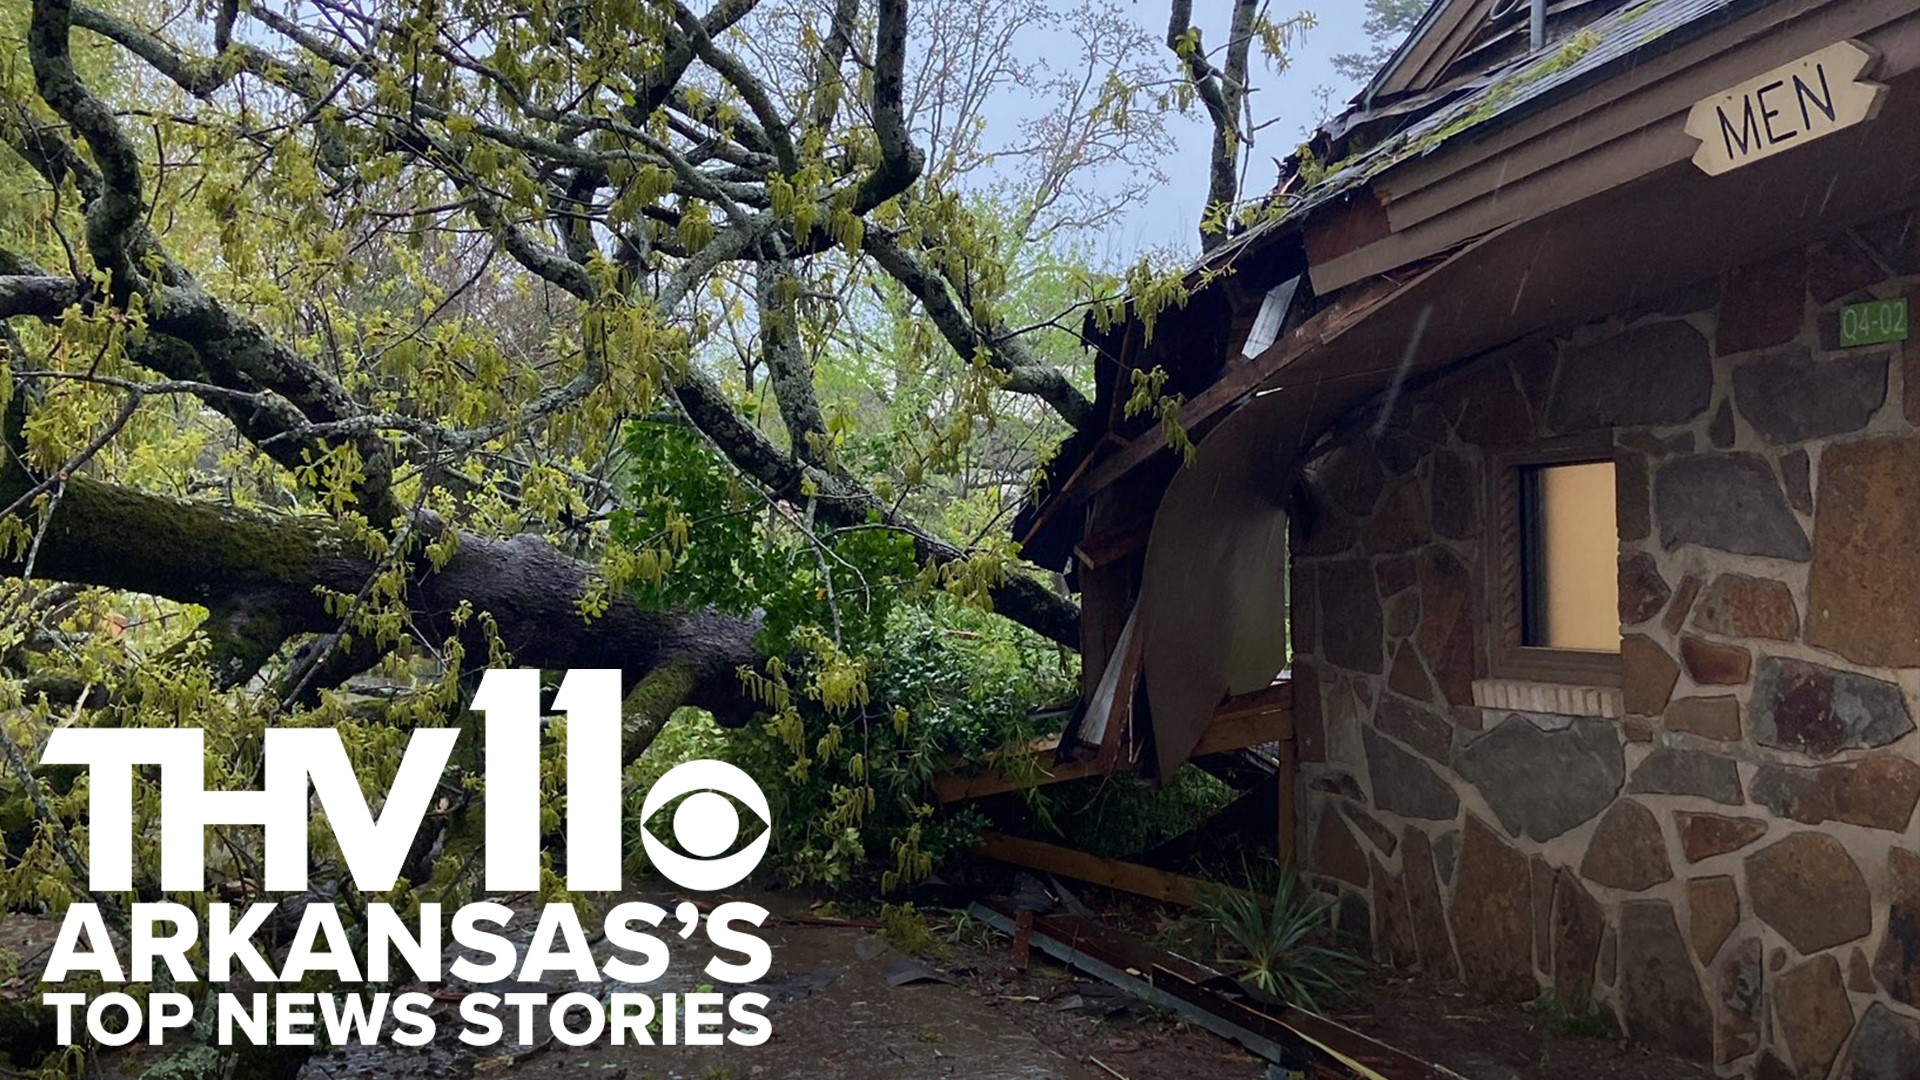 Michael Aaron delivers the latest news for April 14, 2022, which including the impact on this week's severe weather in Arkansas.